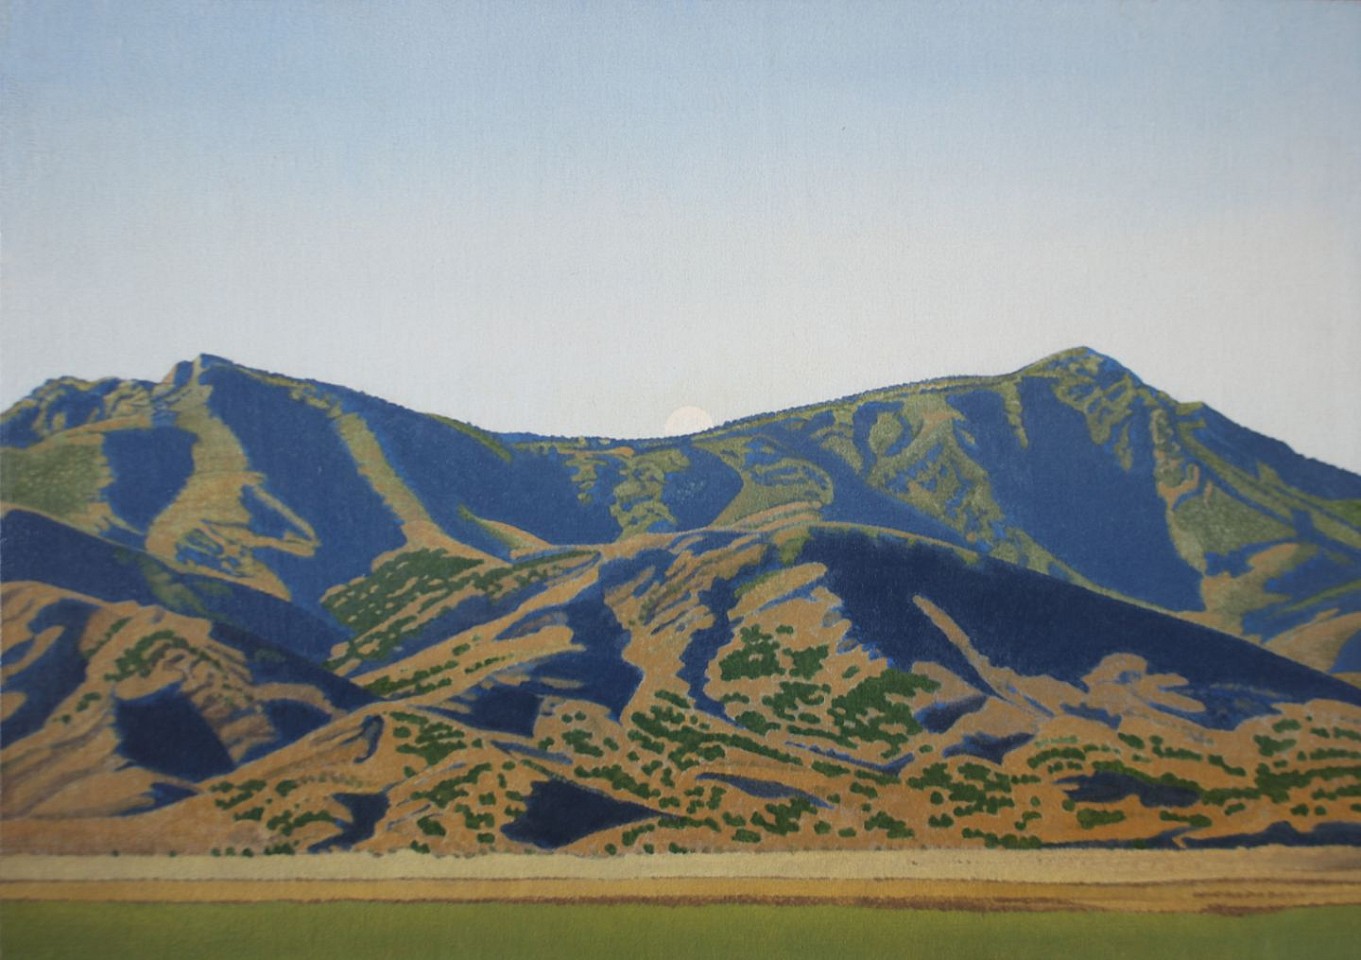 Clay Wagstaff (LA)
Mountain no. 13, 2022
WAG387
oil on panel, 17 x 24 inches